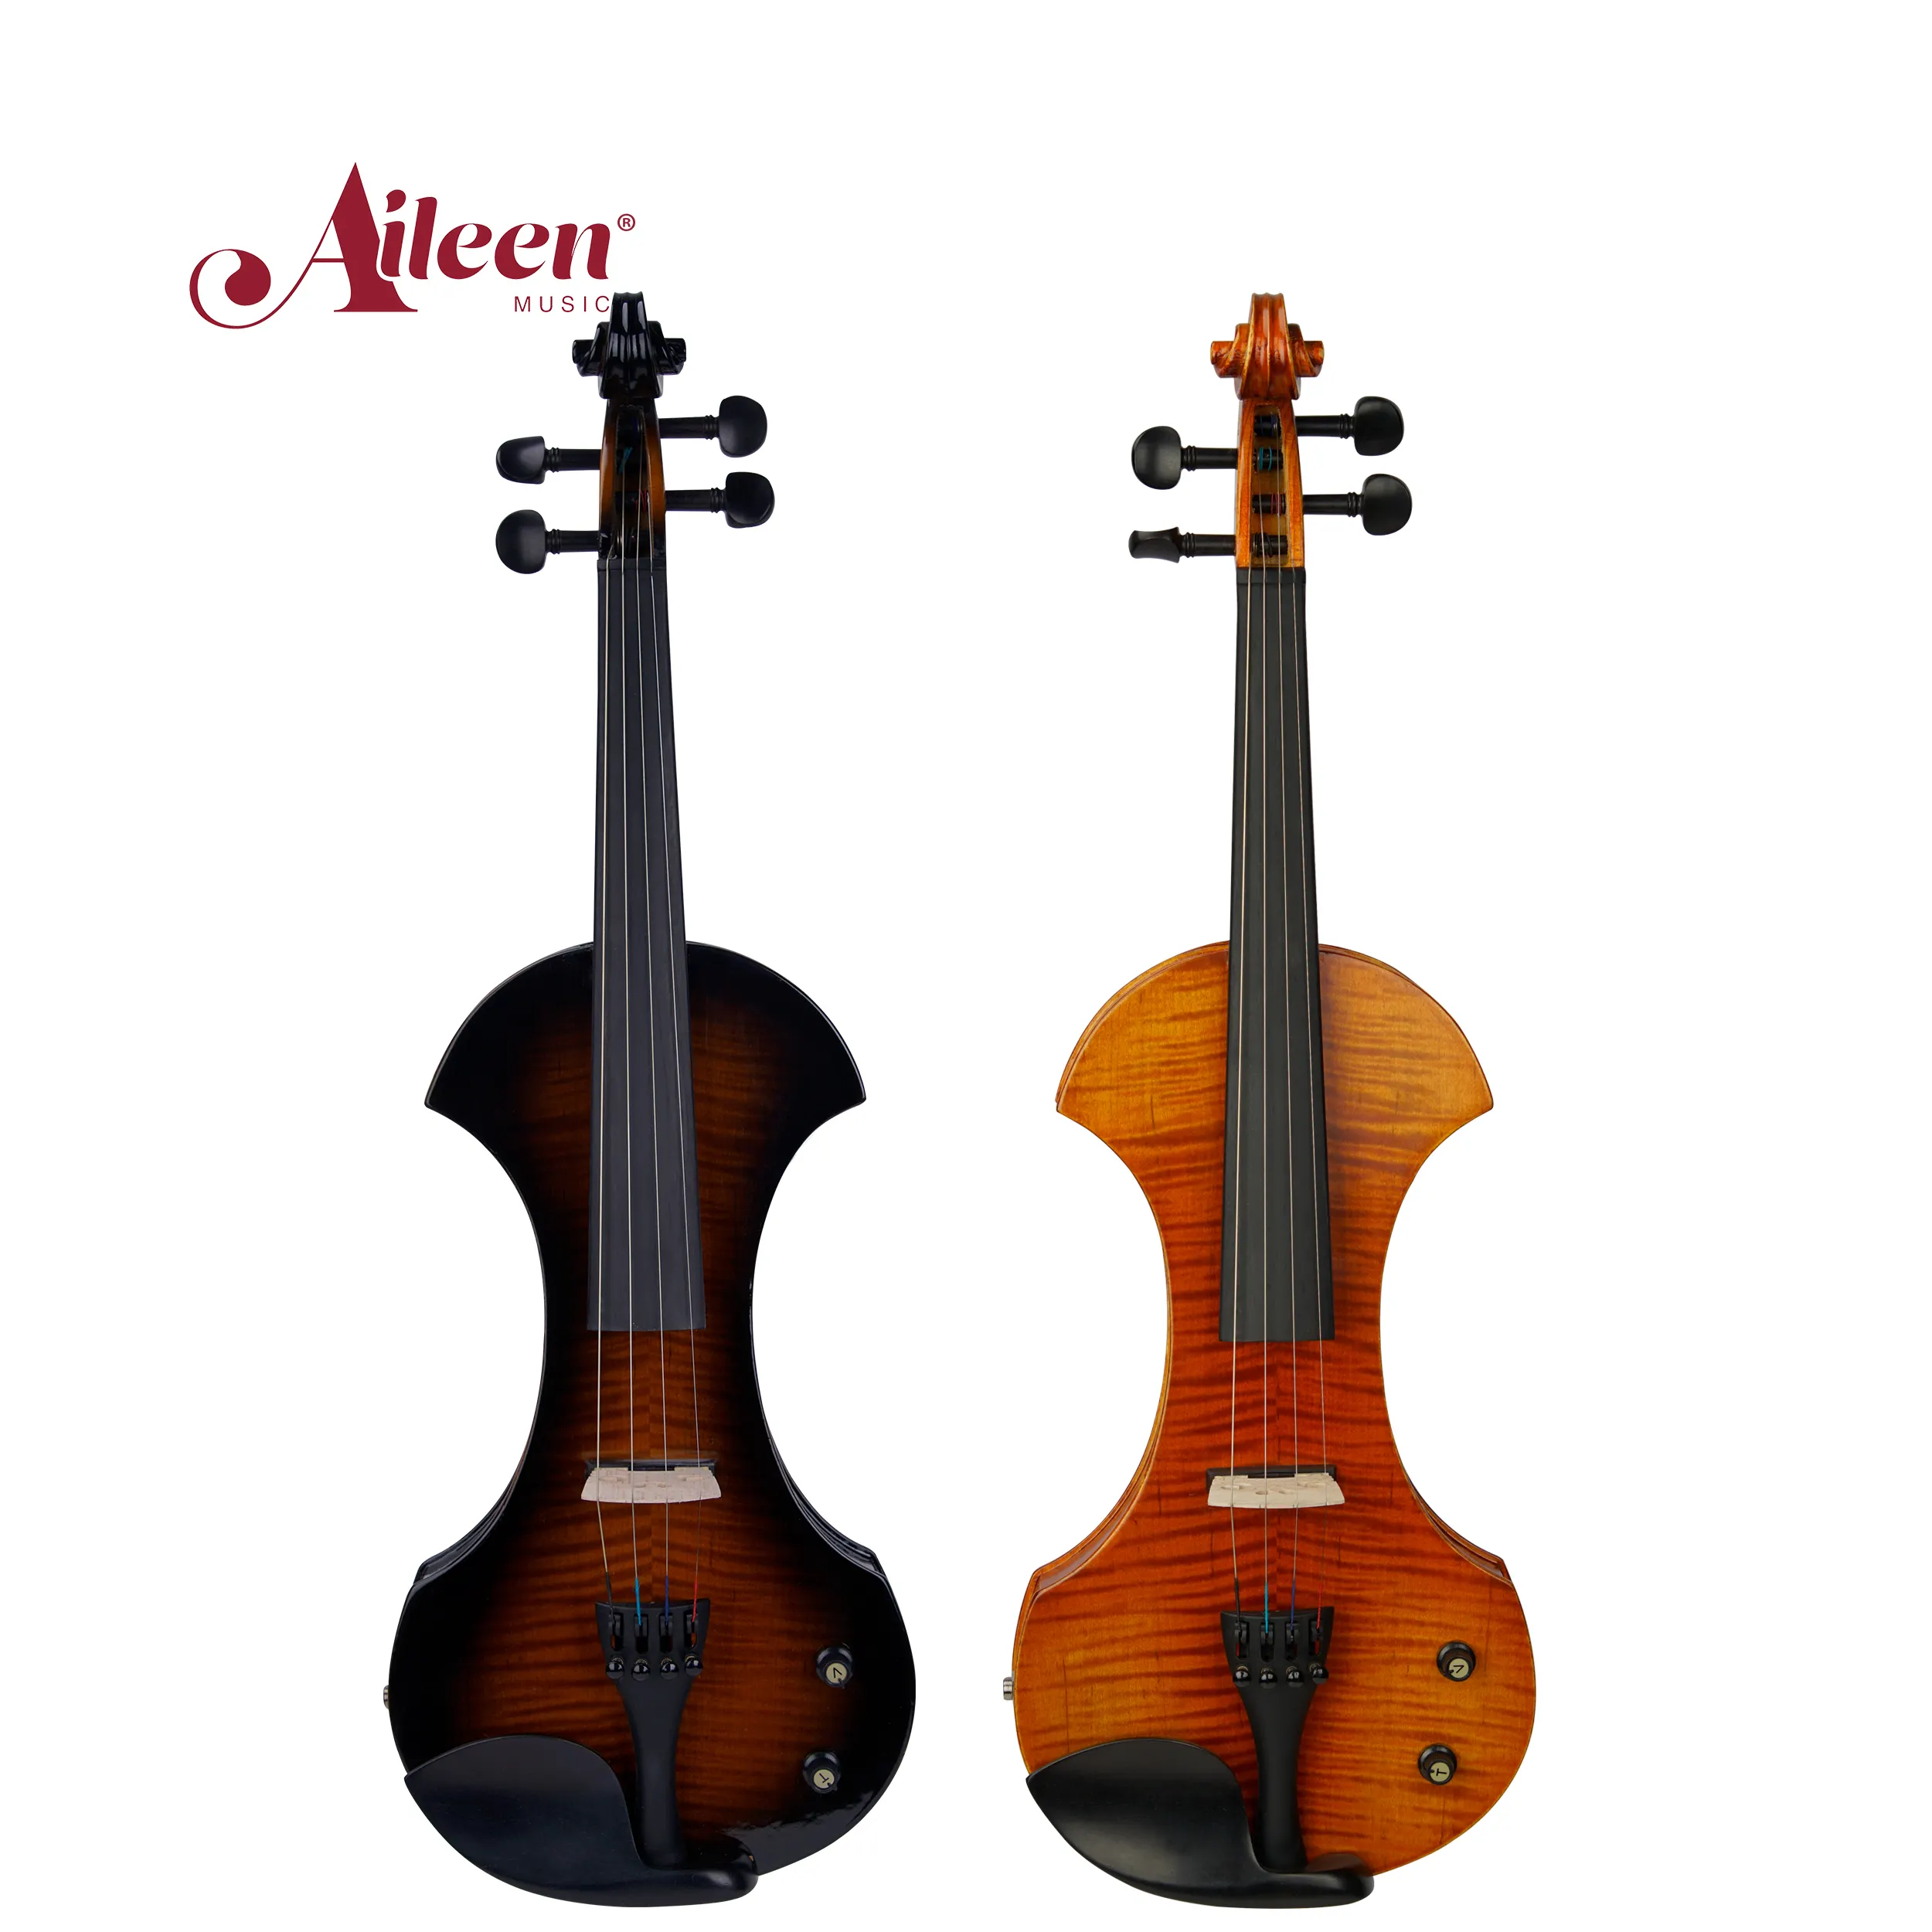 AileenMusic Customized Professional Electric Violin 4/4 Full Size linden with Brazilwood Bow VE502 